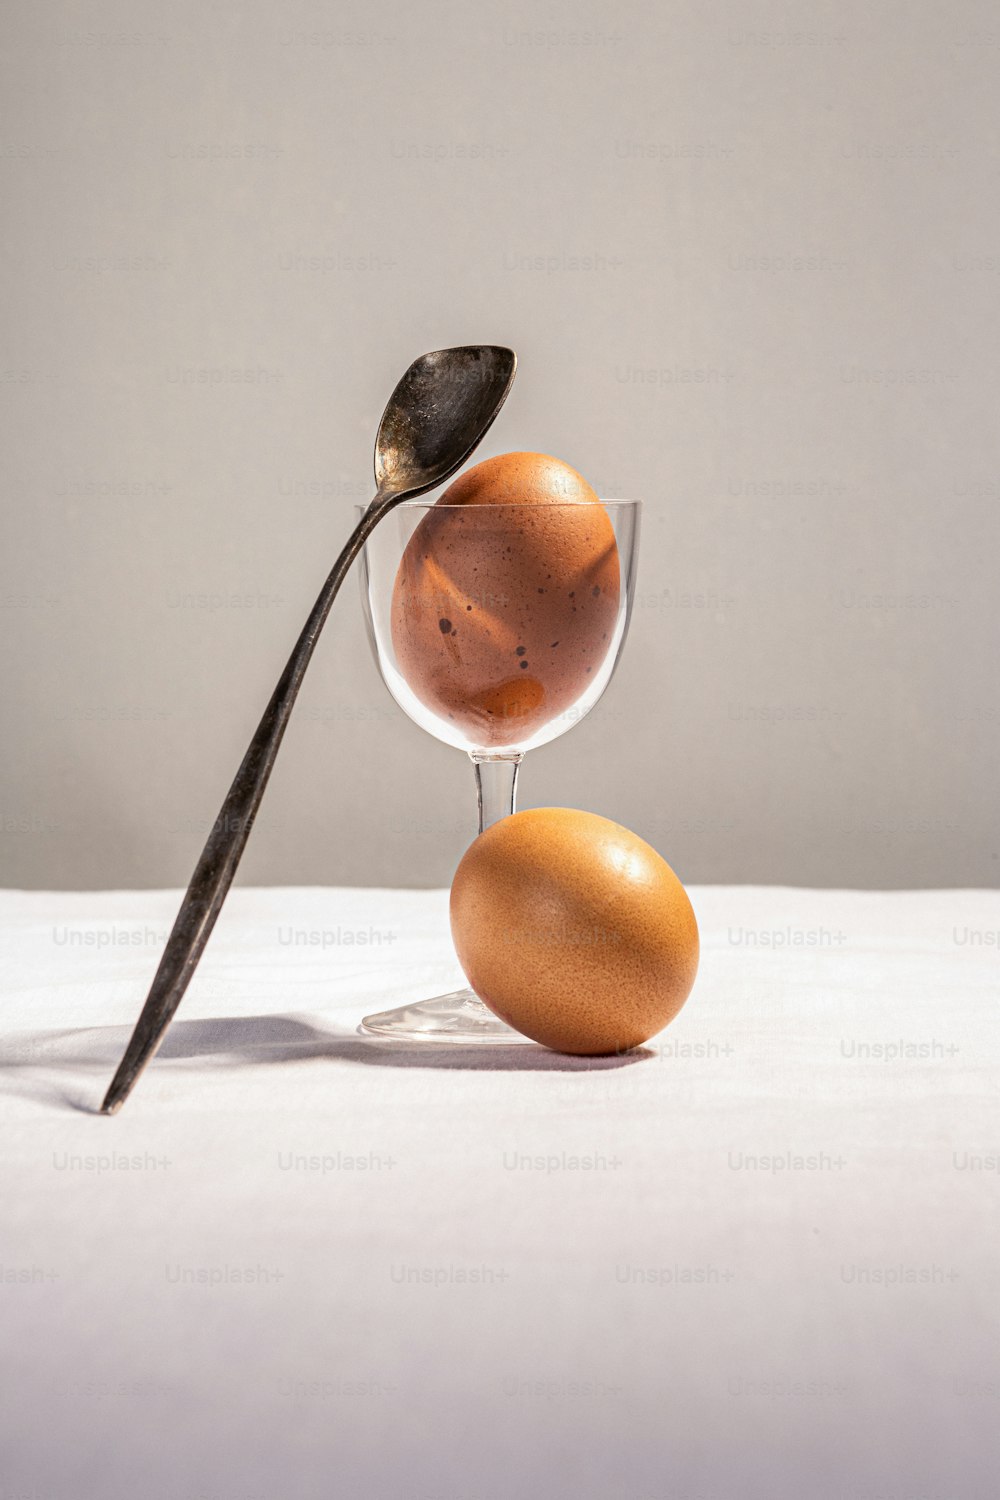 an egg and a spoon on a table